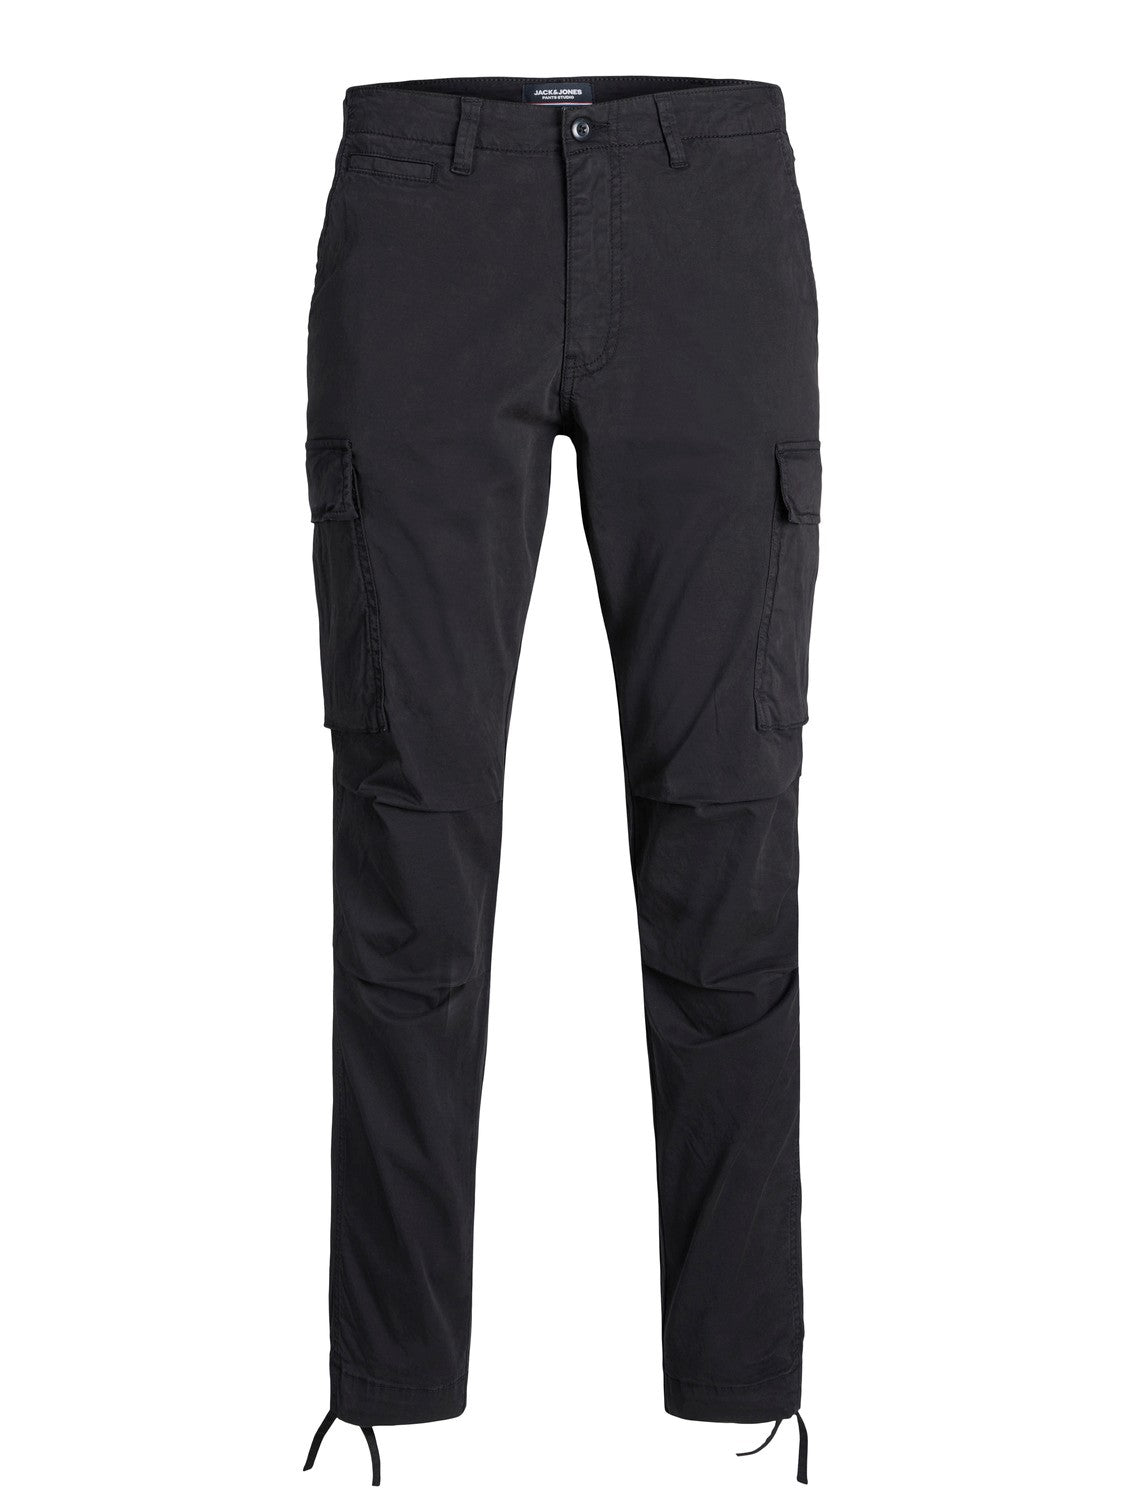 Ace Tucker Black Cargo Pants-Front view